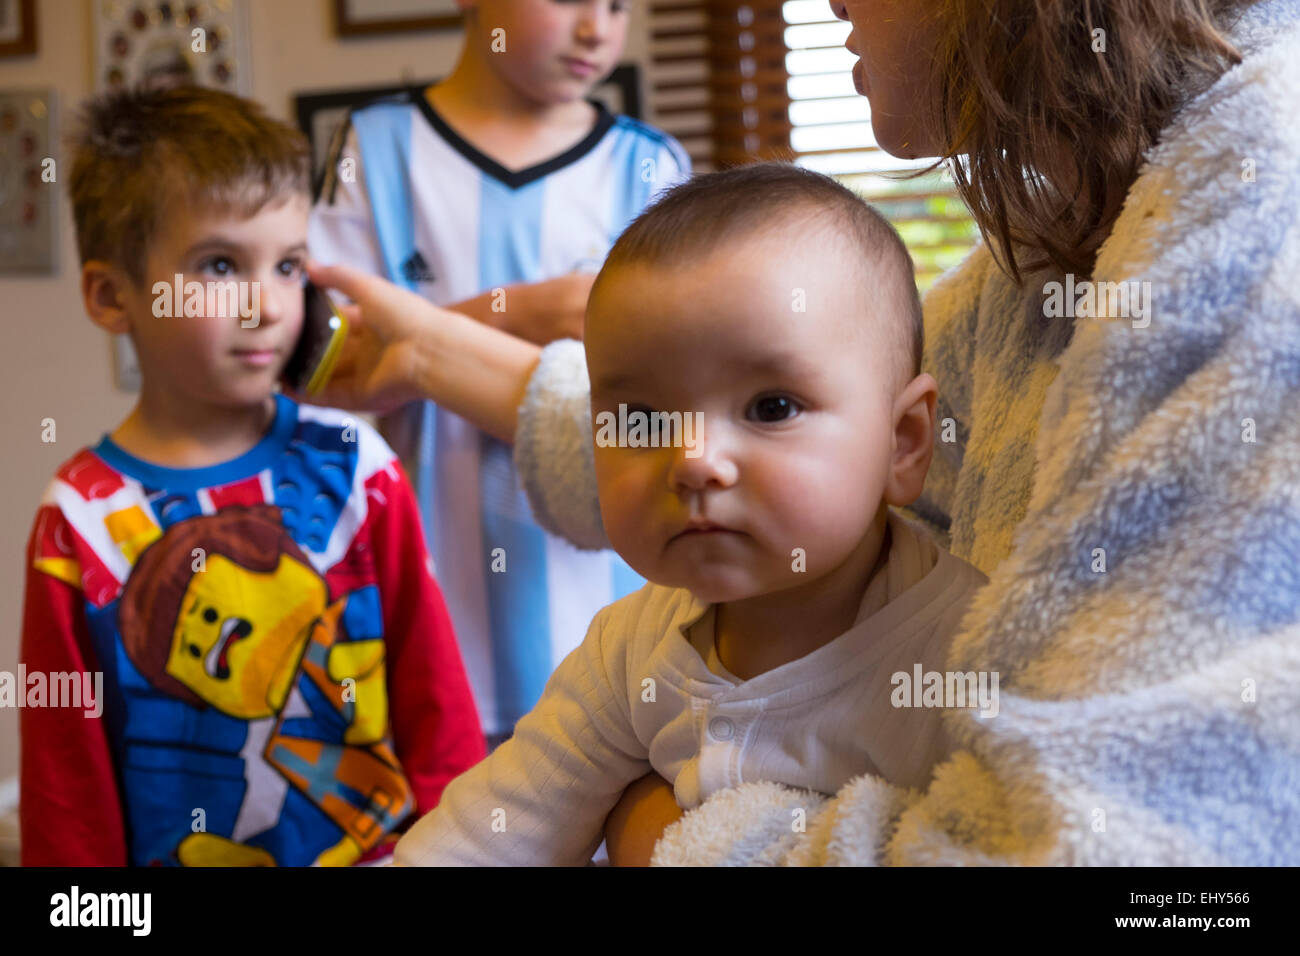 Child speaking on mobile phone with other family members Stock Photo